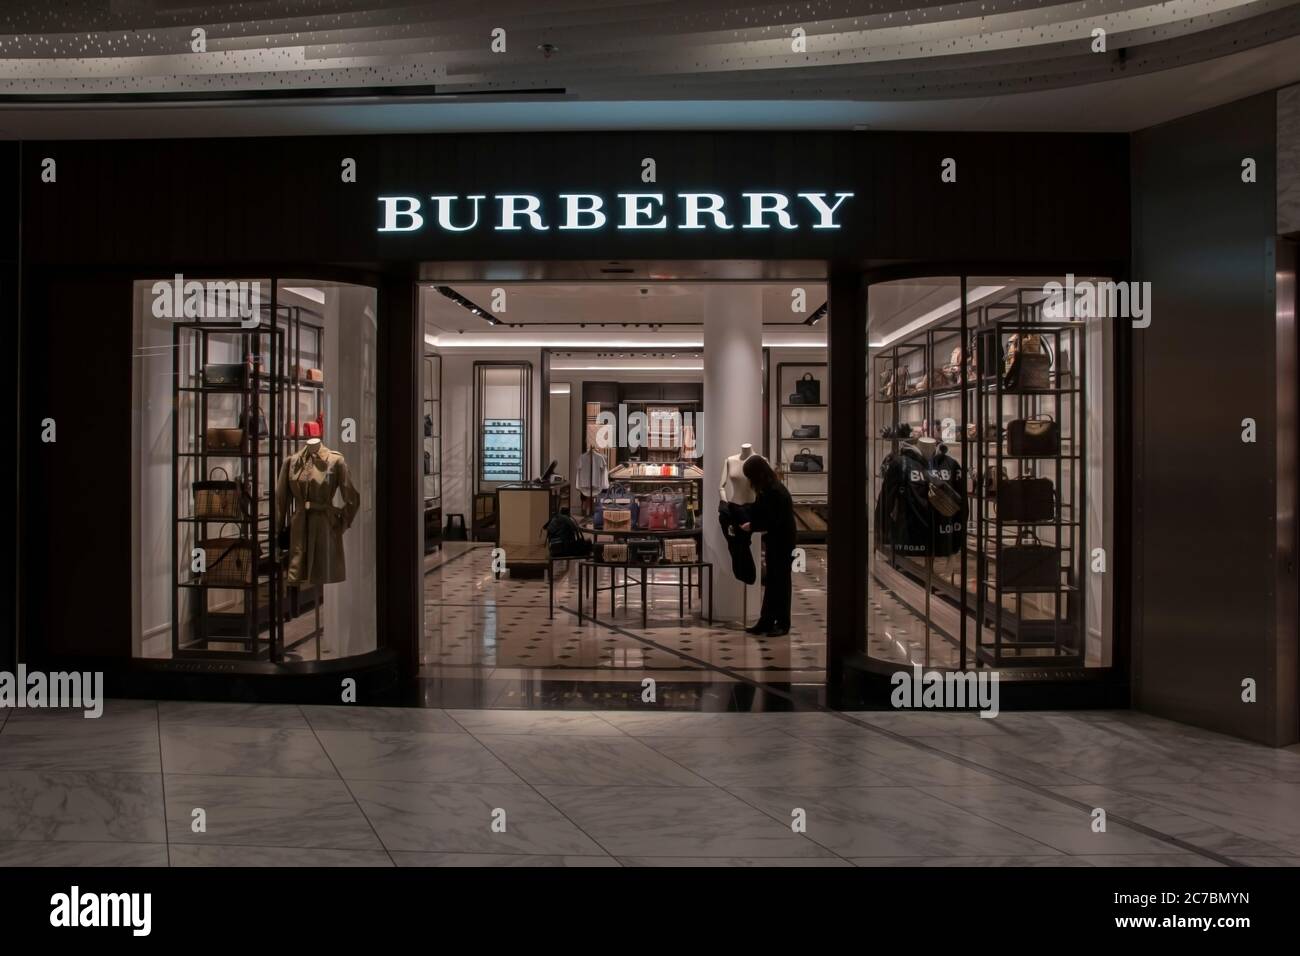 Burberry Shop Schiphol Airport Behind The At Amsterdam The 7-12-2019 Stock Photo - Alamy